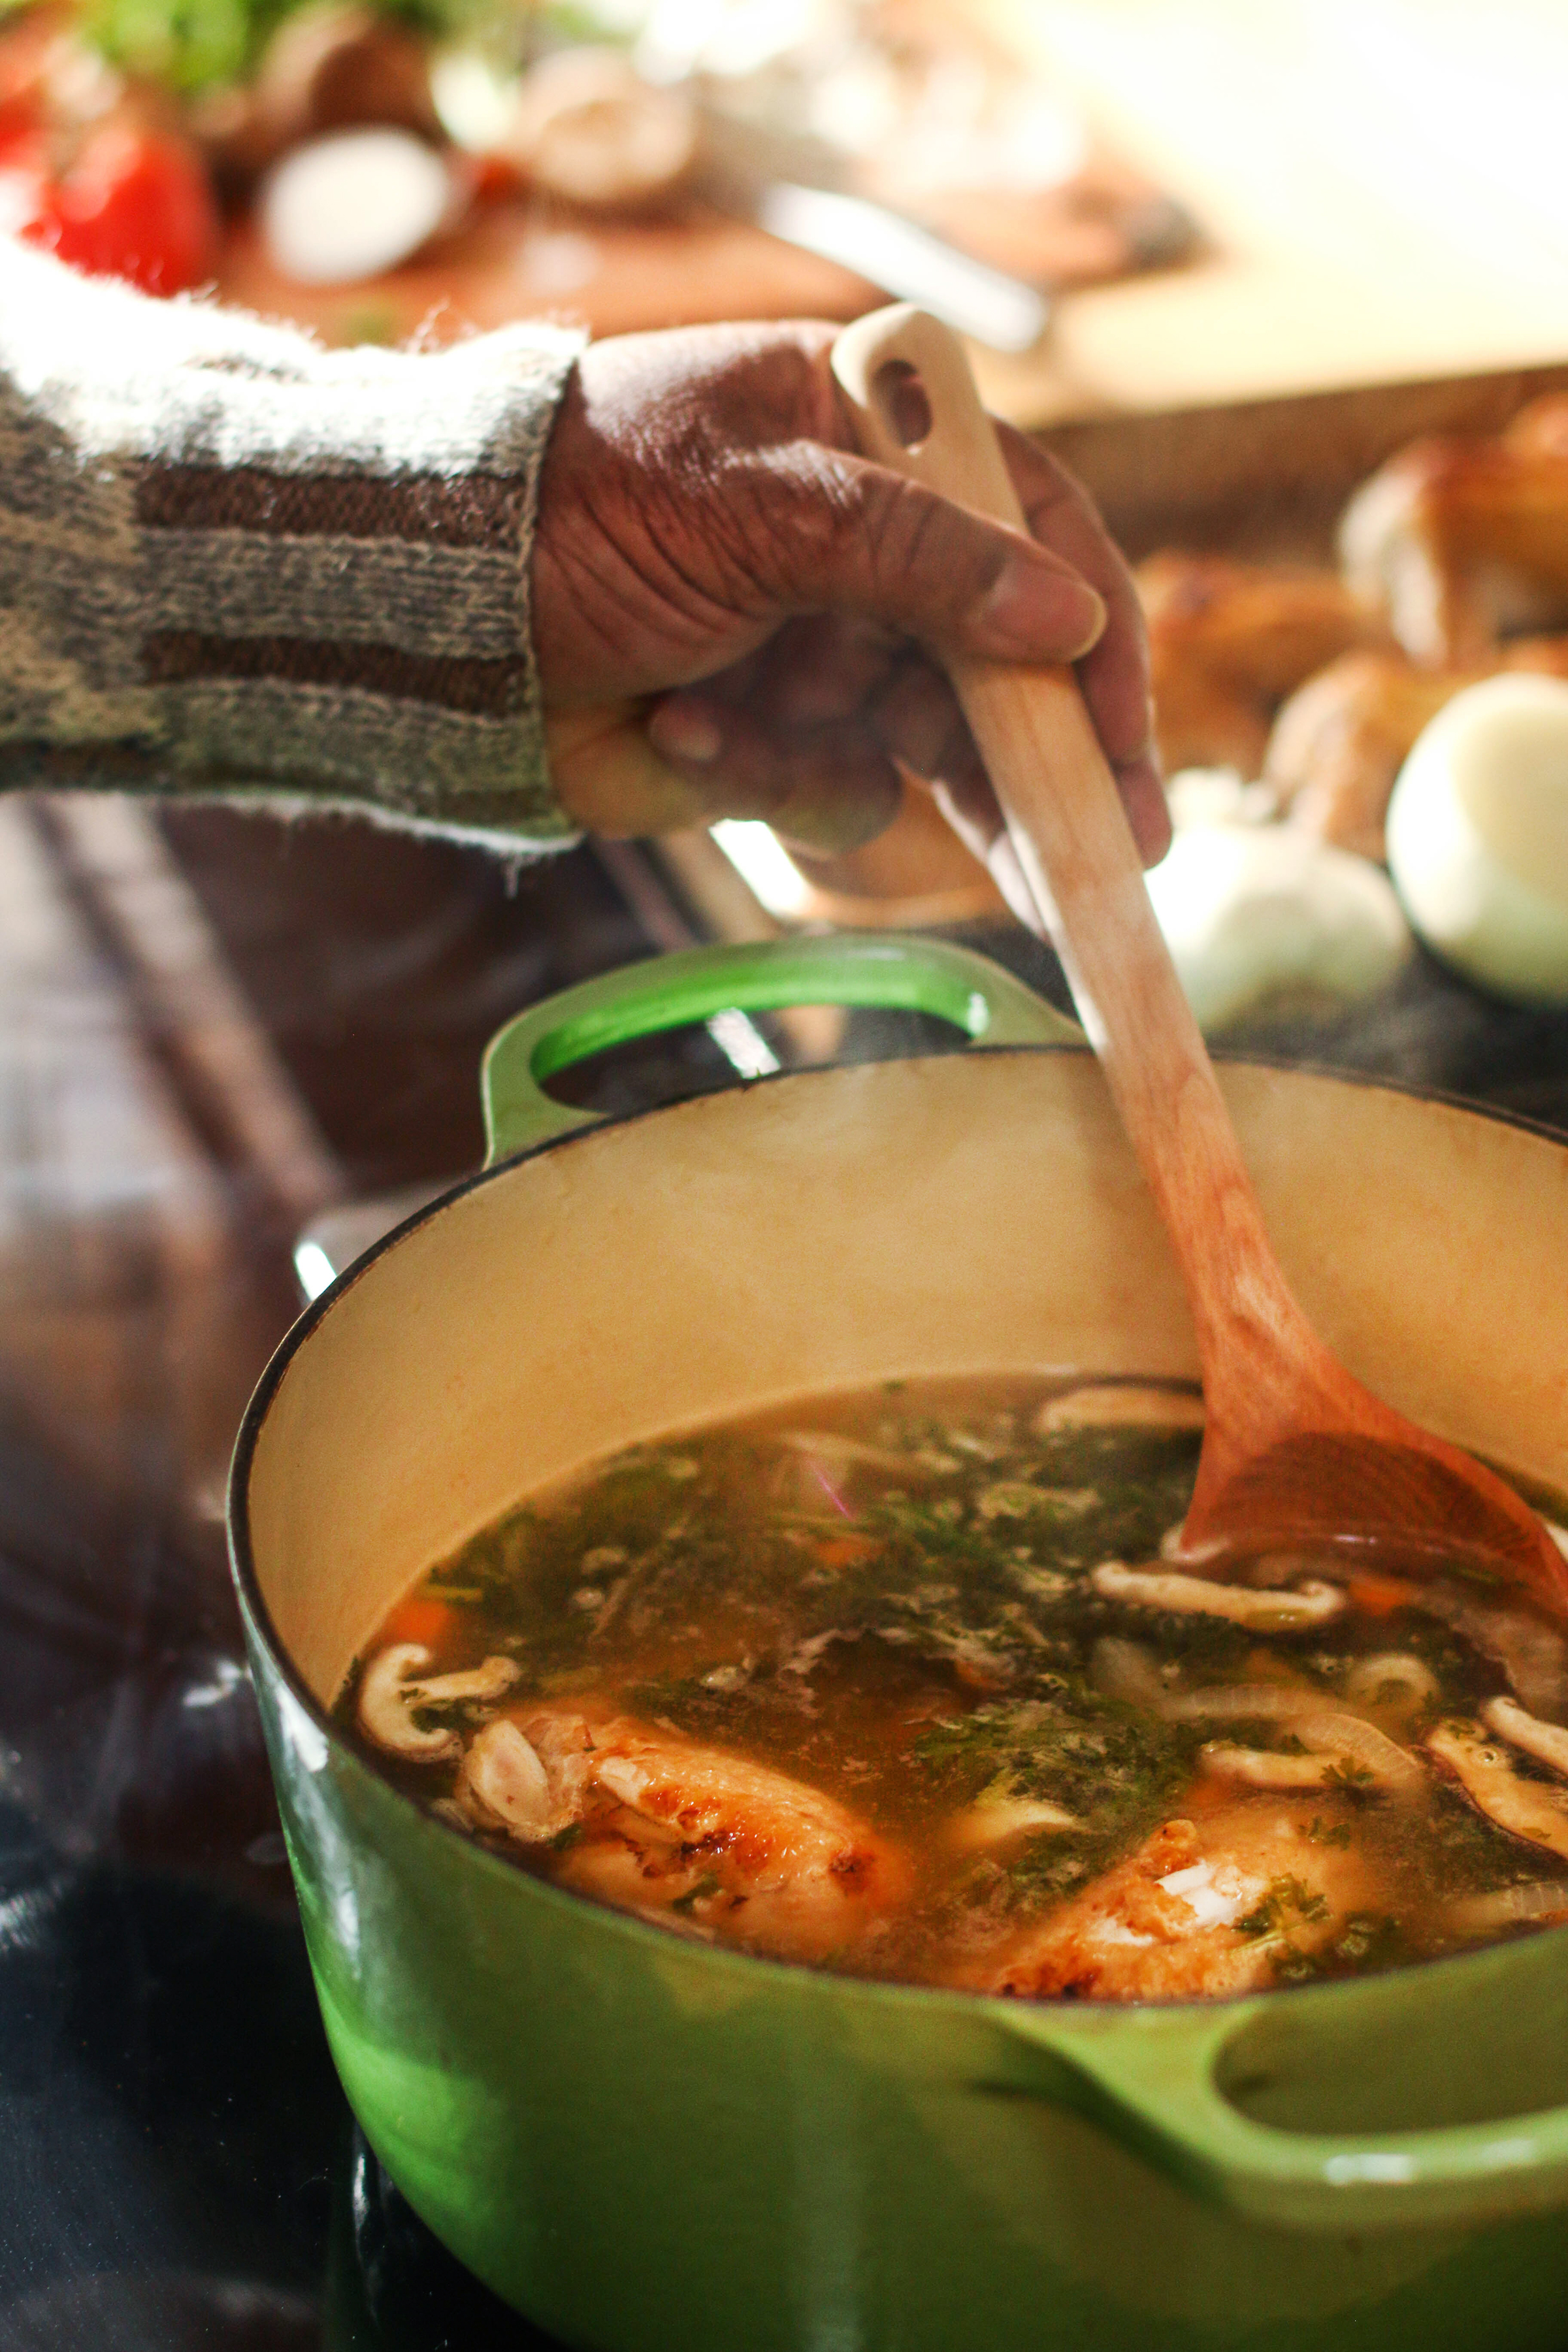 Person stirring broth with wooden spoon in green Le Creuset